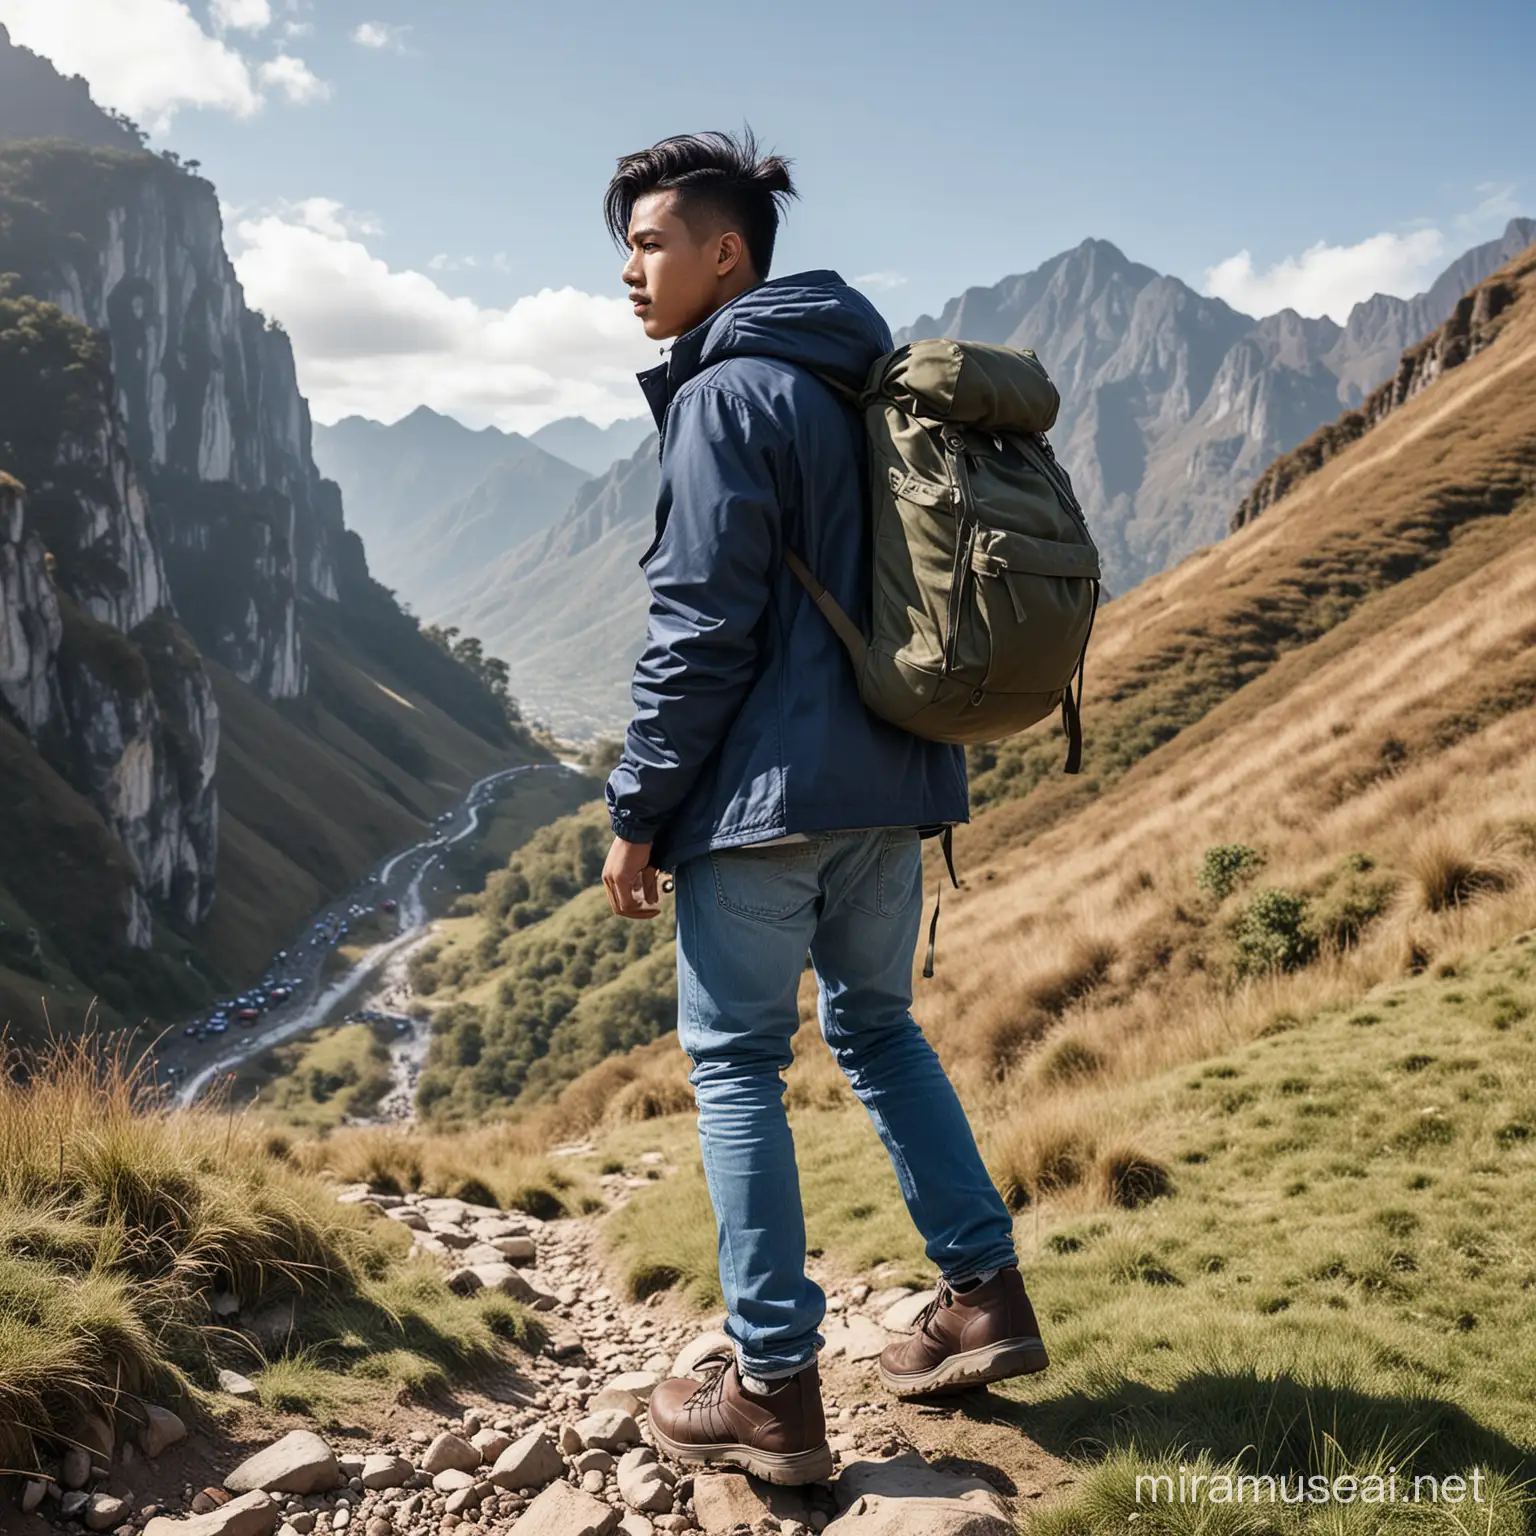 Photograph of a 20-year-old Indonesian man, undercut bun hair, wearing a t-shirt and a parka jacket, blue jeans, leather shoes, carrying a large backpack, descending a steep terrain, location of a beautiful mountain